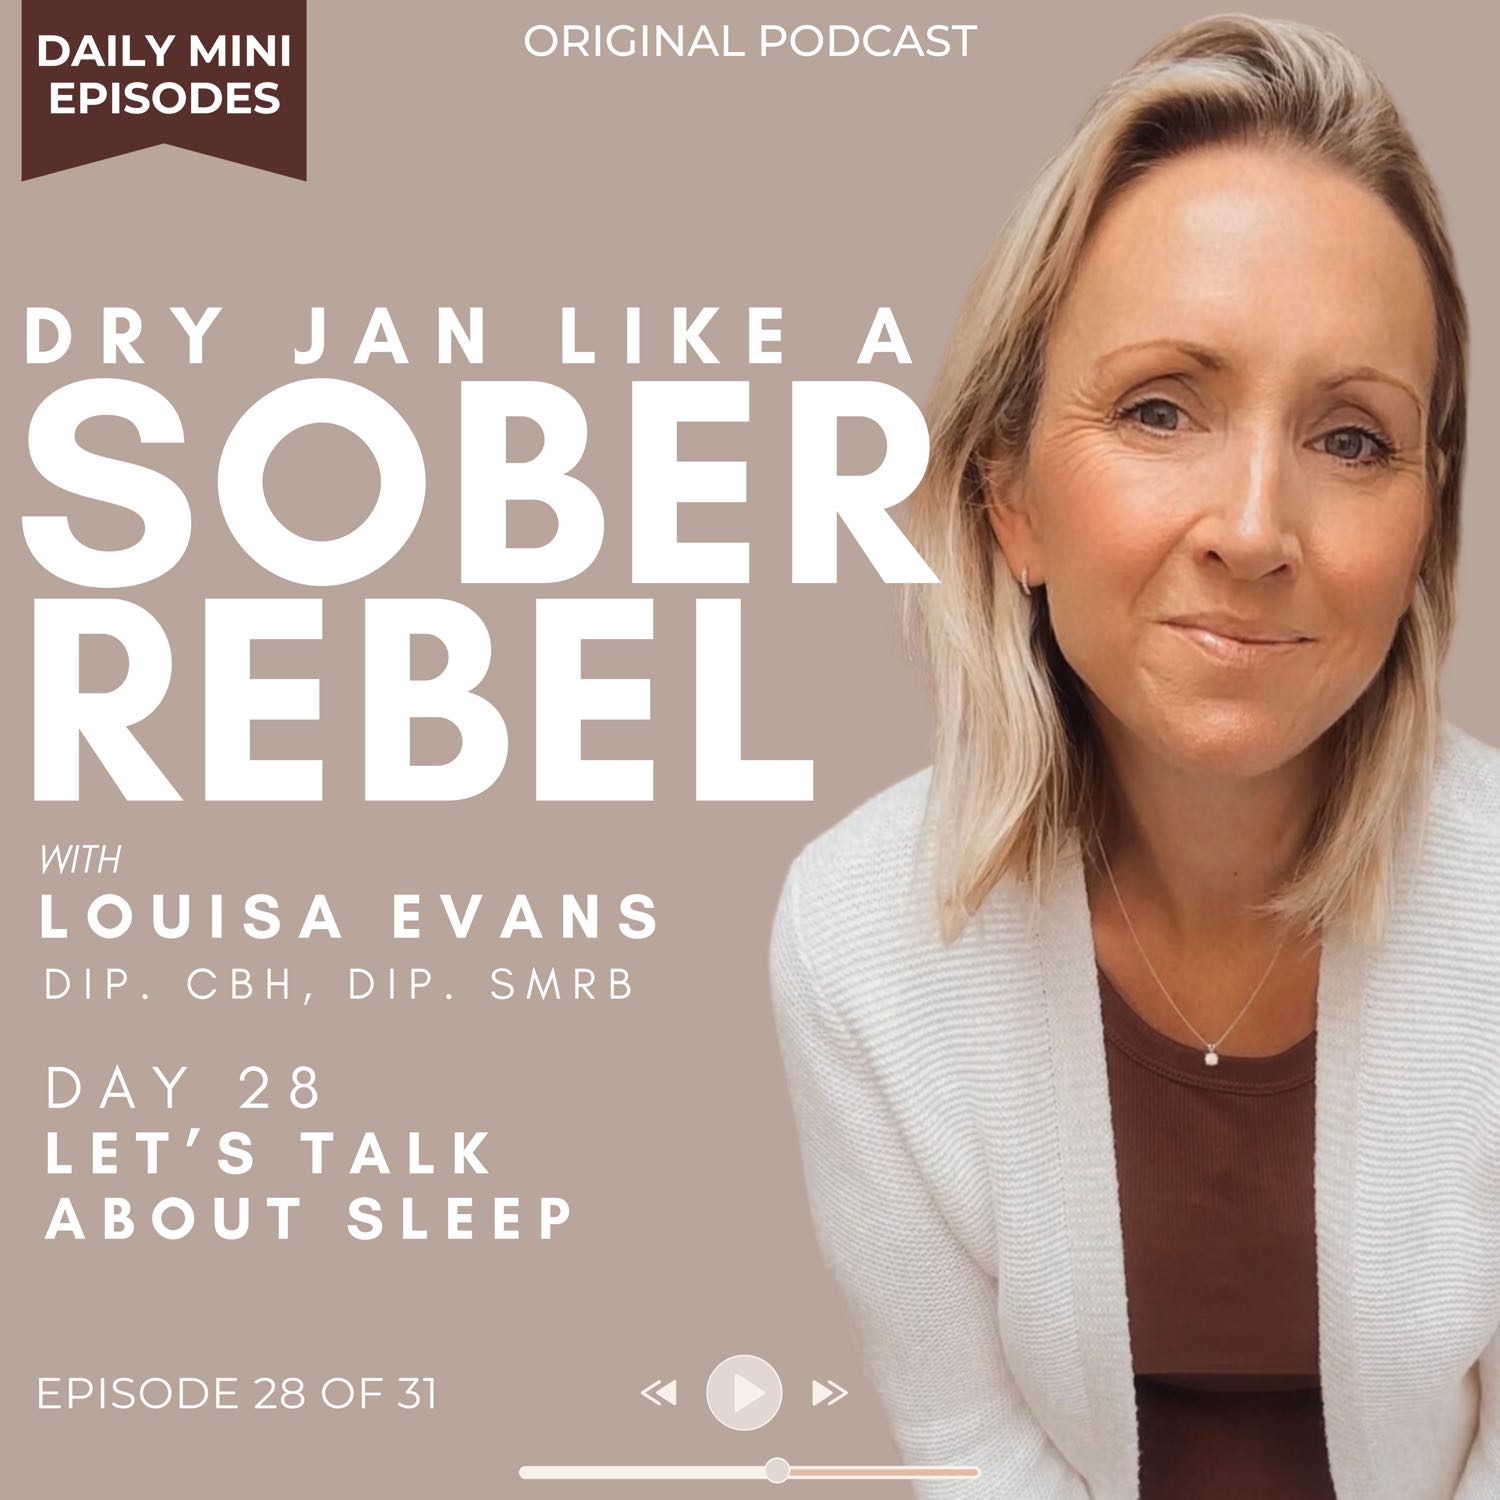 Dry Jan like a Sober Rebel | Let's talk about sleep | Day 28